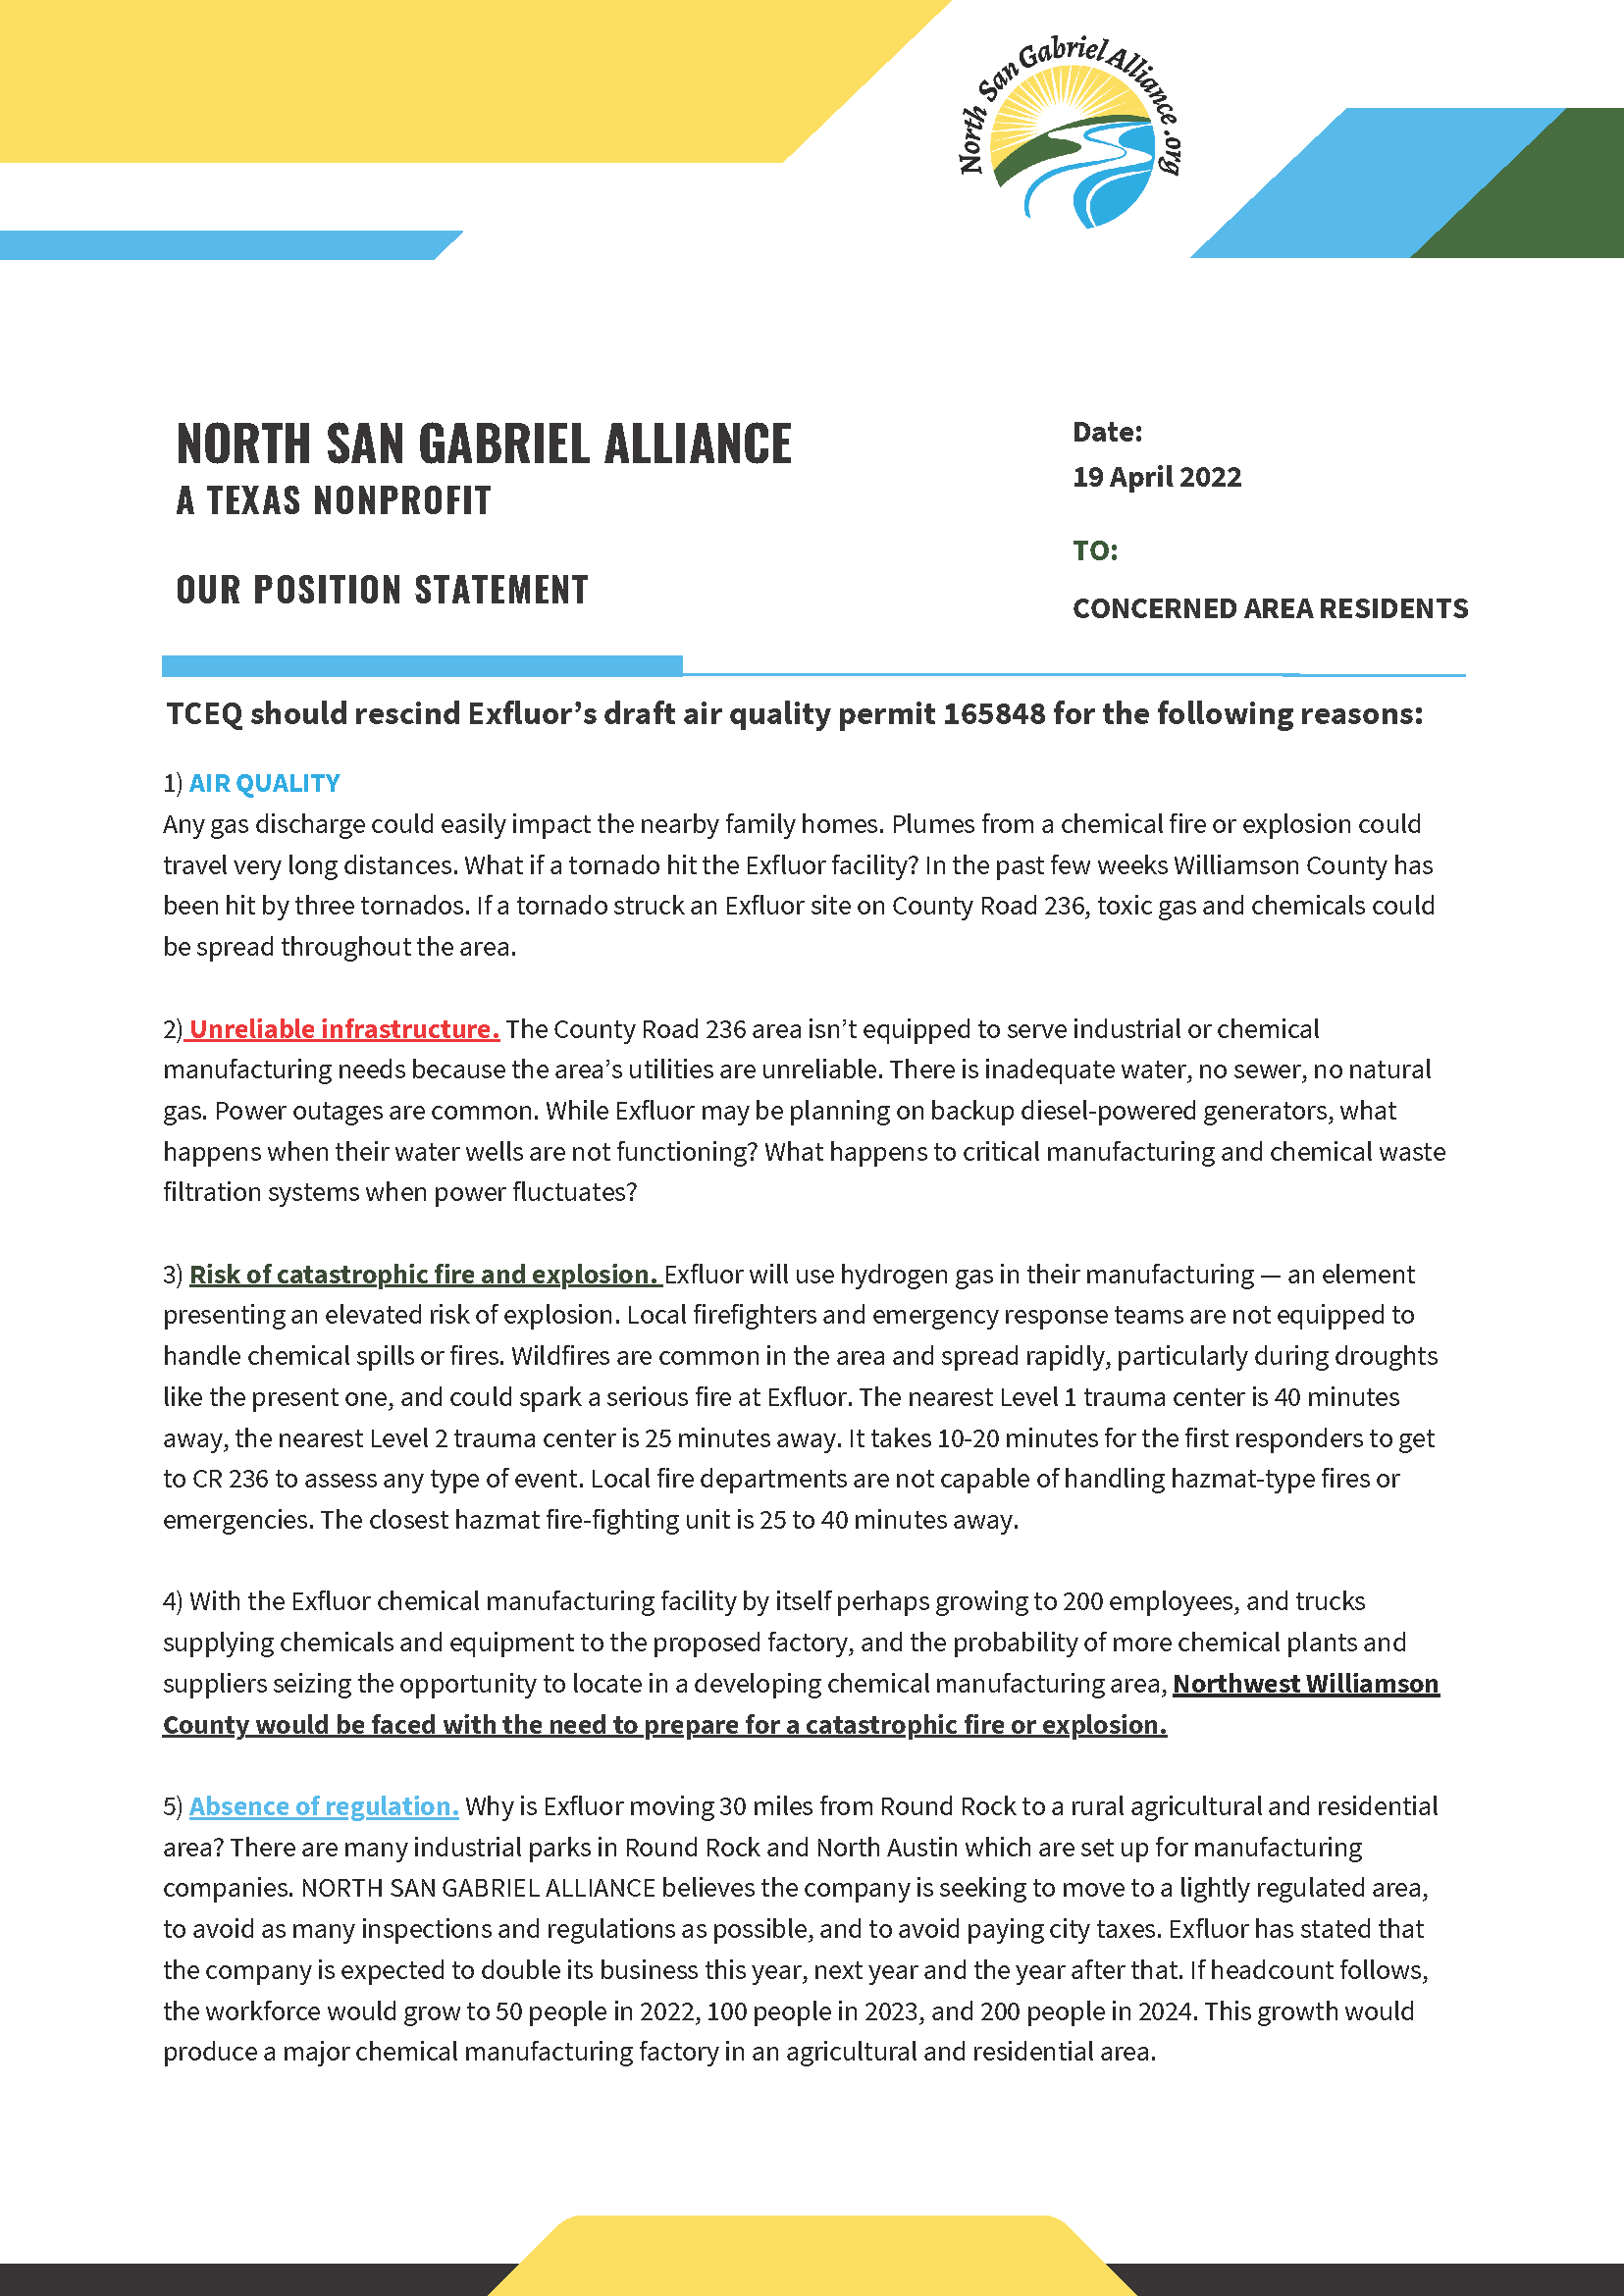 North San Gabriel Alliance Position Statement from the Board